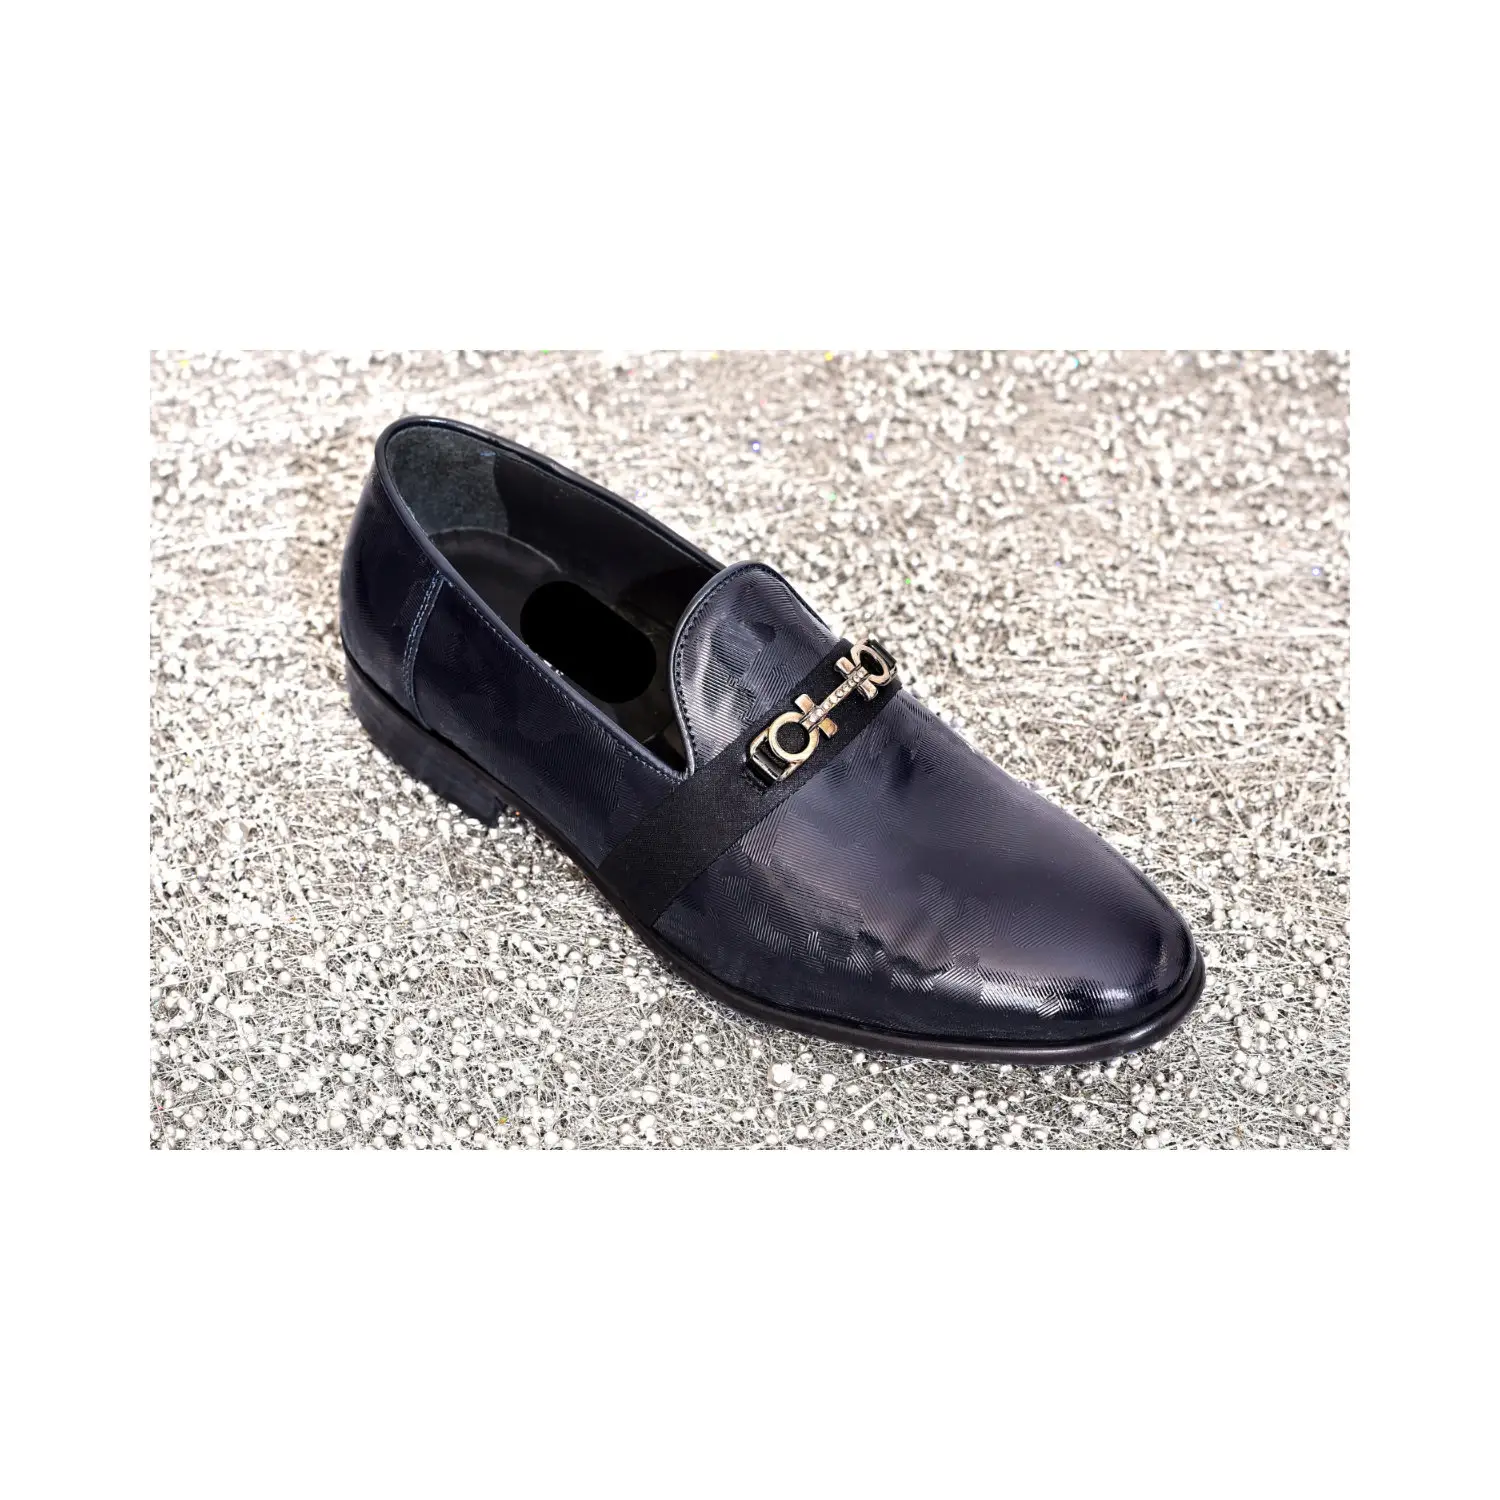 High Quality Made in Italy - Moccasins for Men - Elegant Shoes Dress with Clamp and Satin Strip Shoes for Wedding